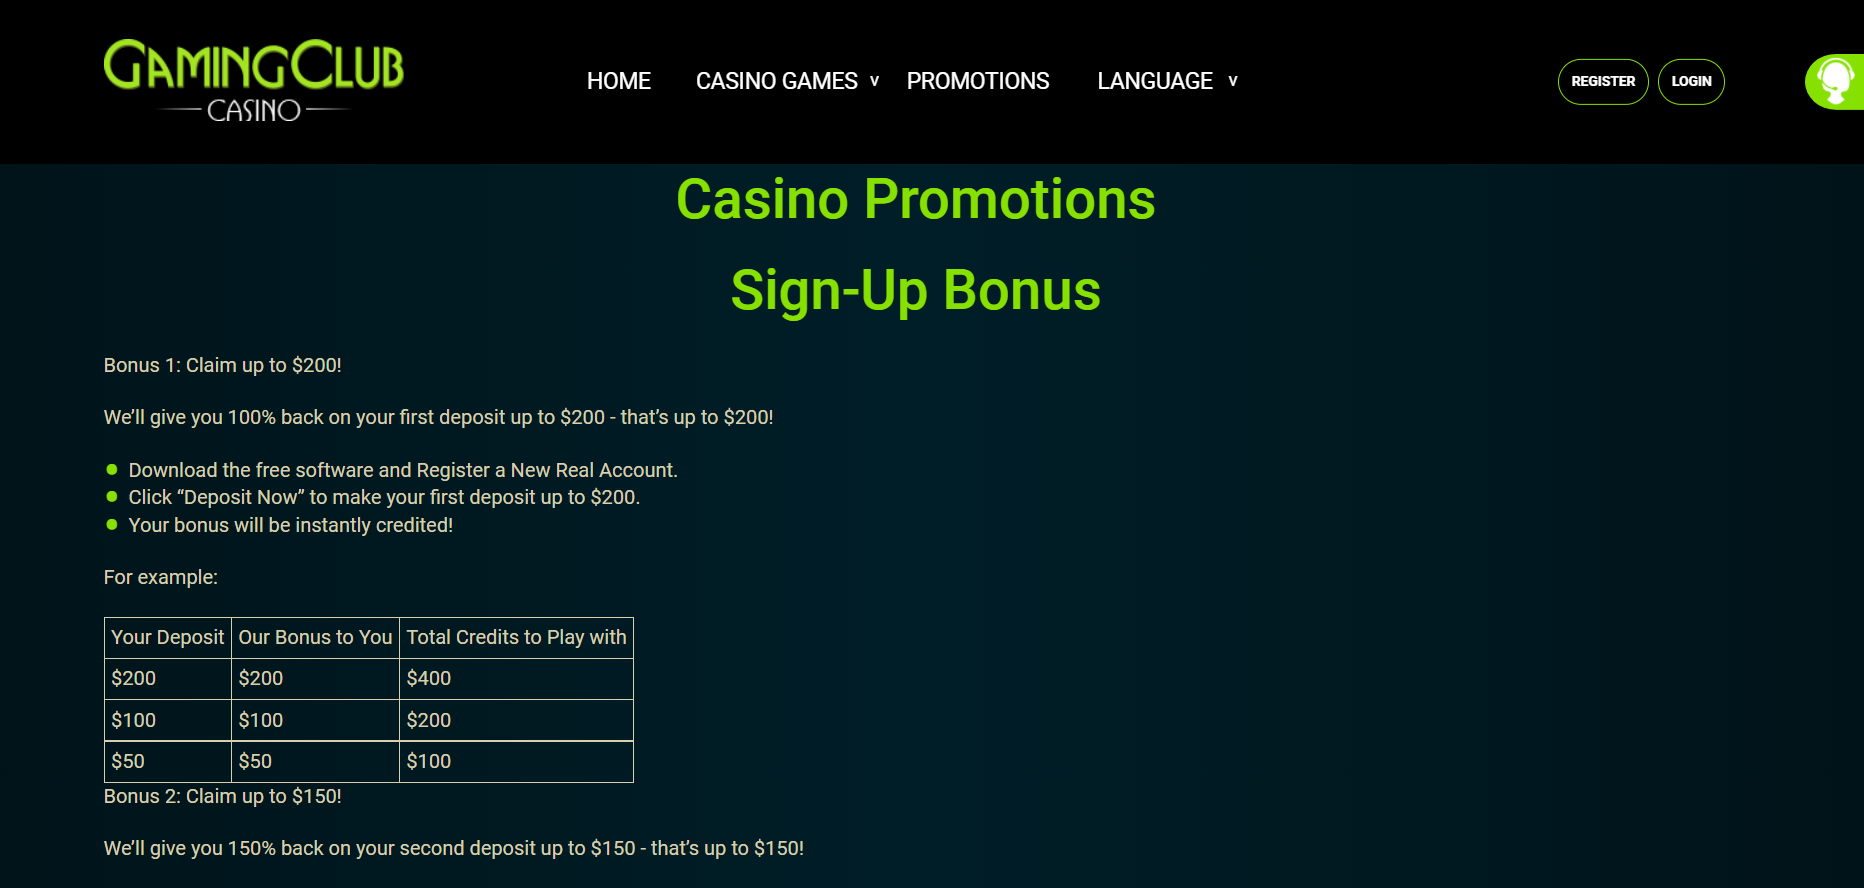 Gaming Club casino promotions